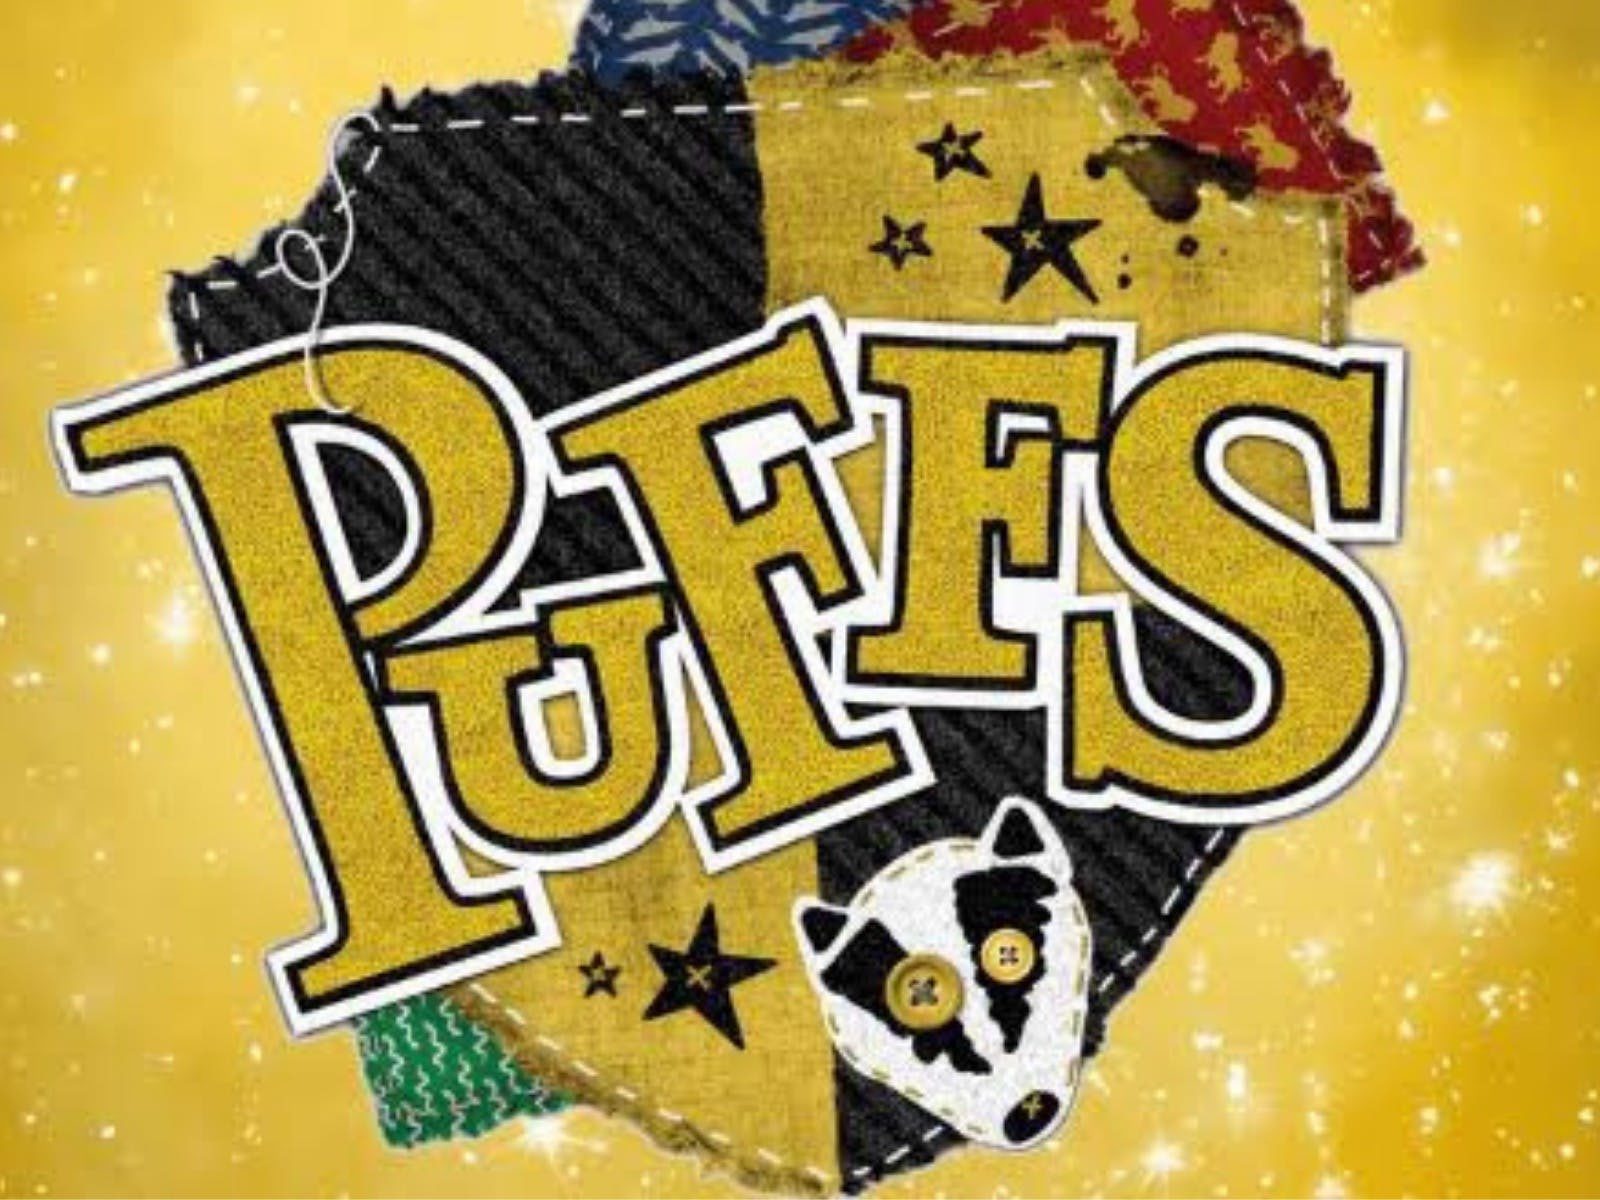 Puffs Logo on a Yellow Background